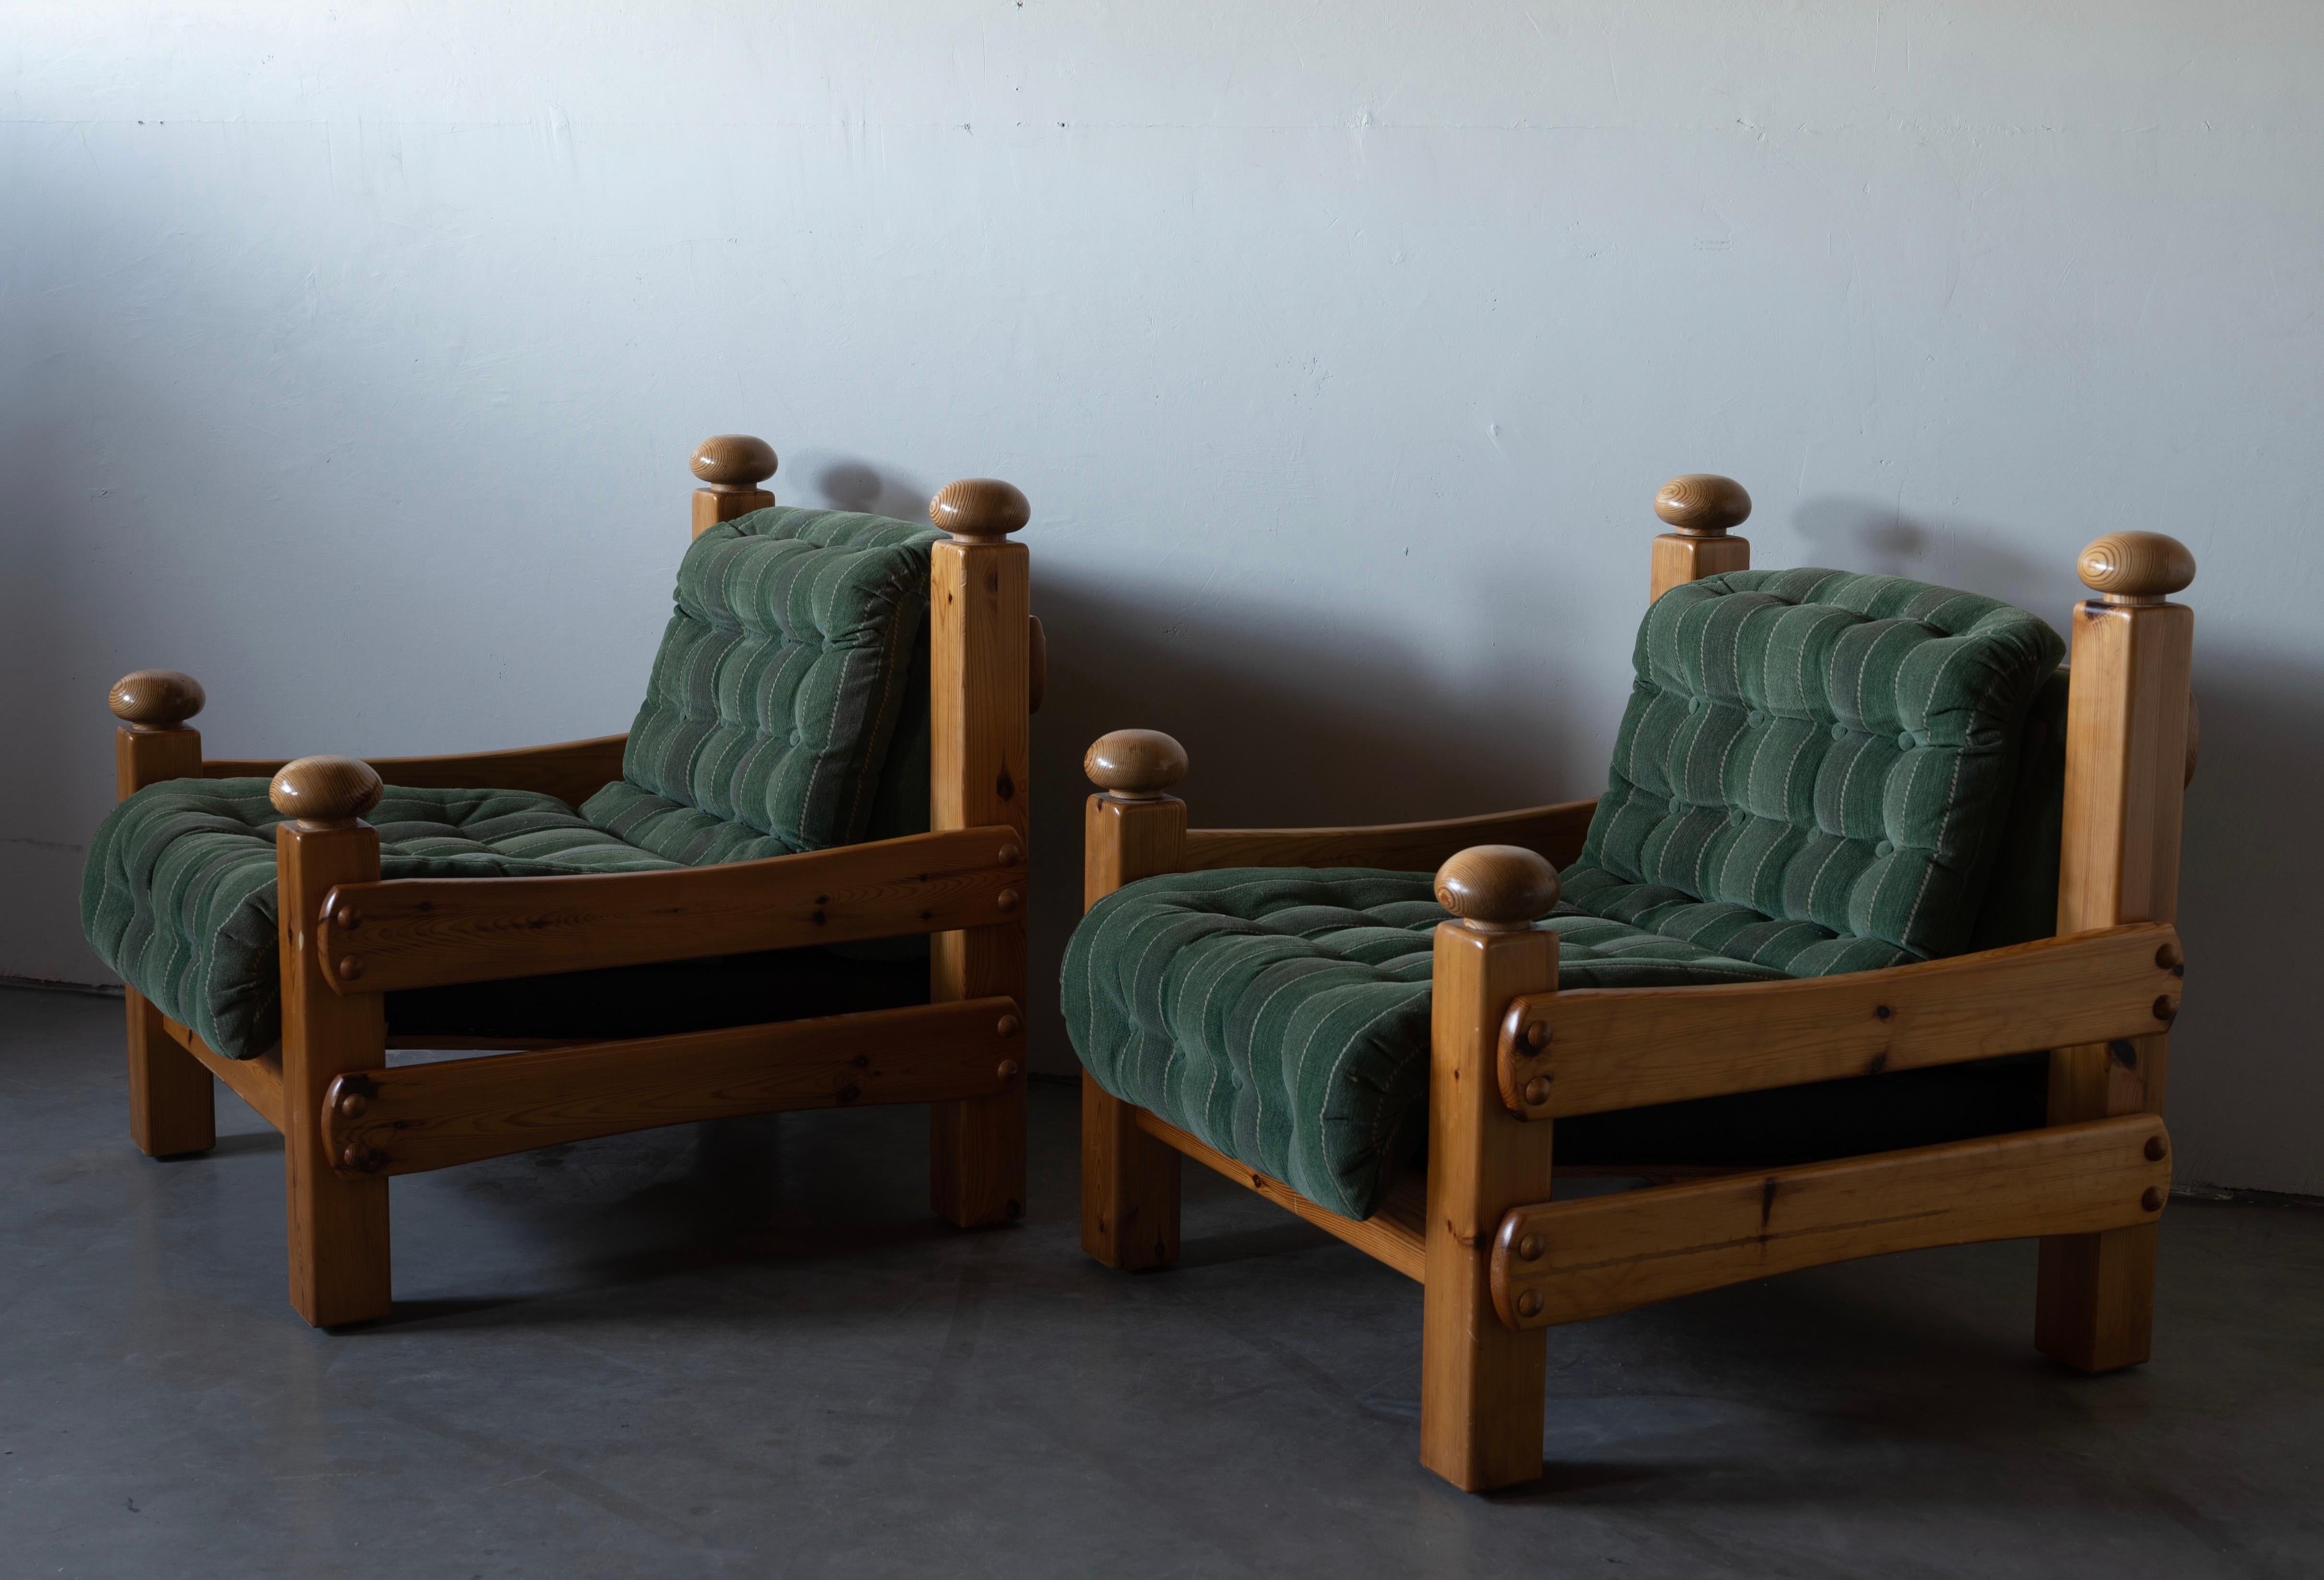 Modern Swedish Designer, Lounge Chairs, Solid Pine, Green Fabric, Sweden, 1970s For Sale